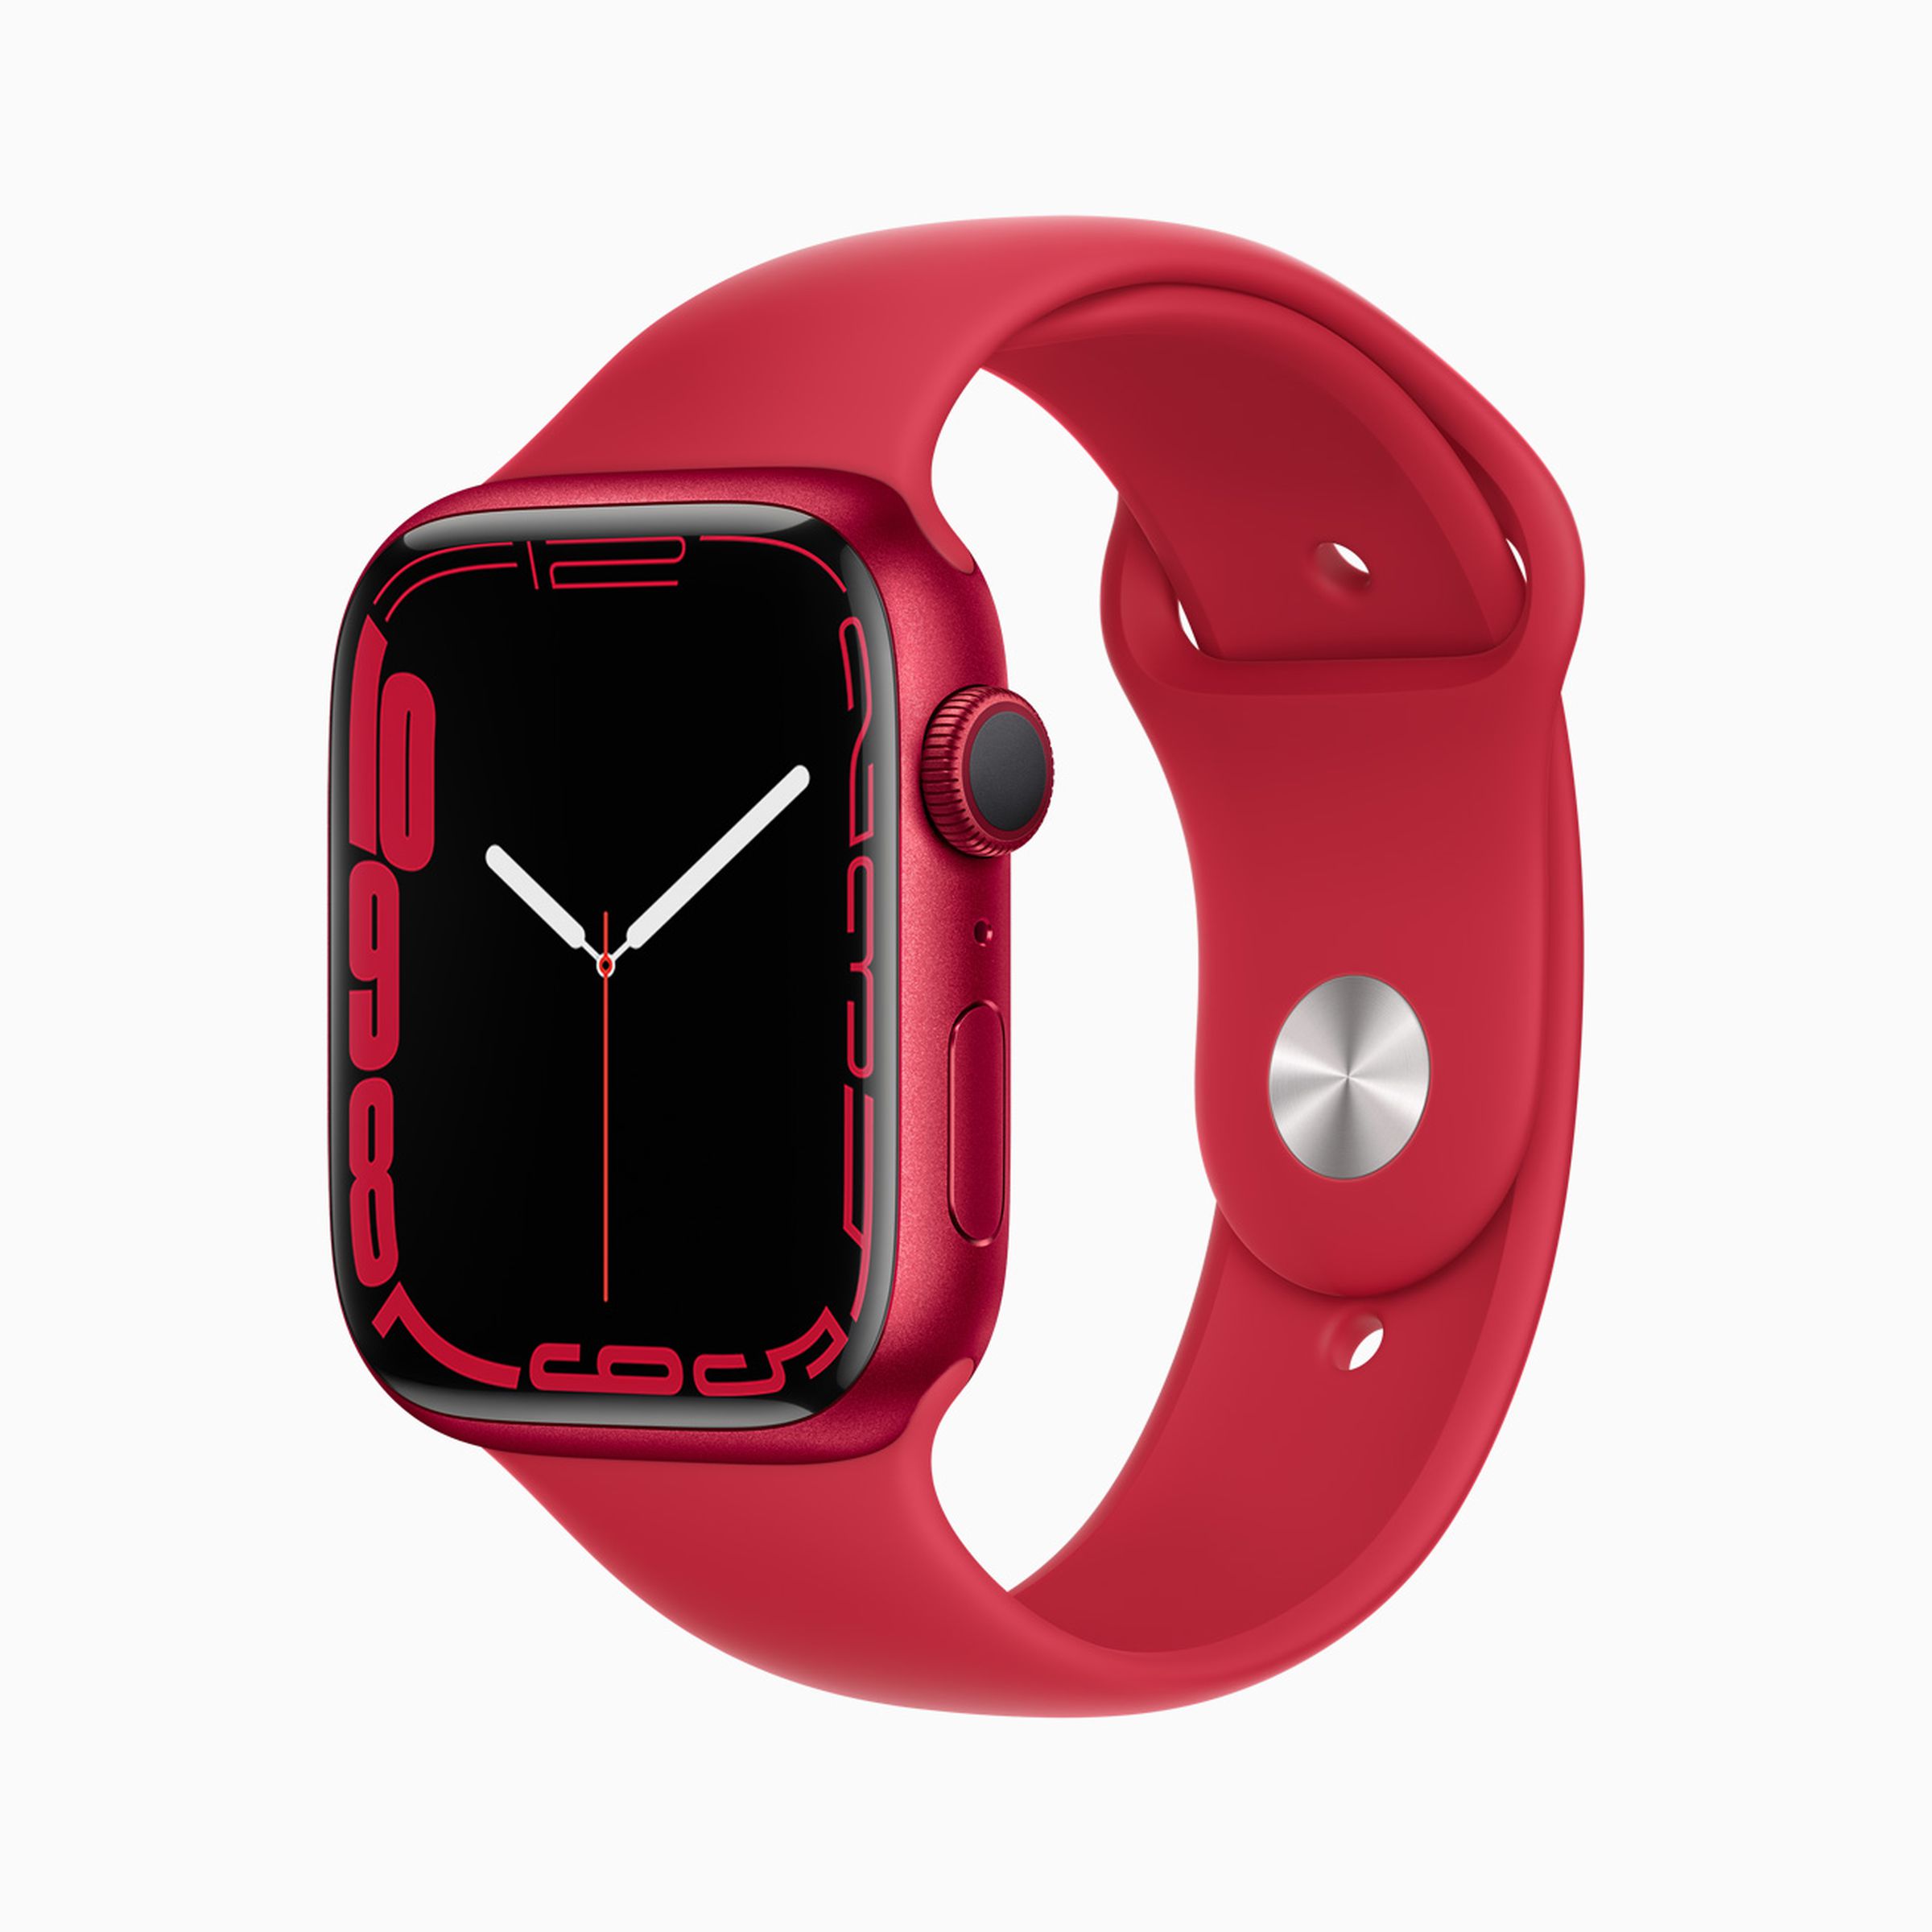 Apple’s new Contour watchface for the Watch Series 7.